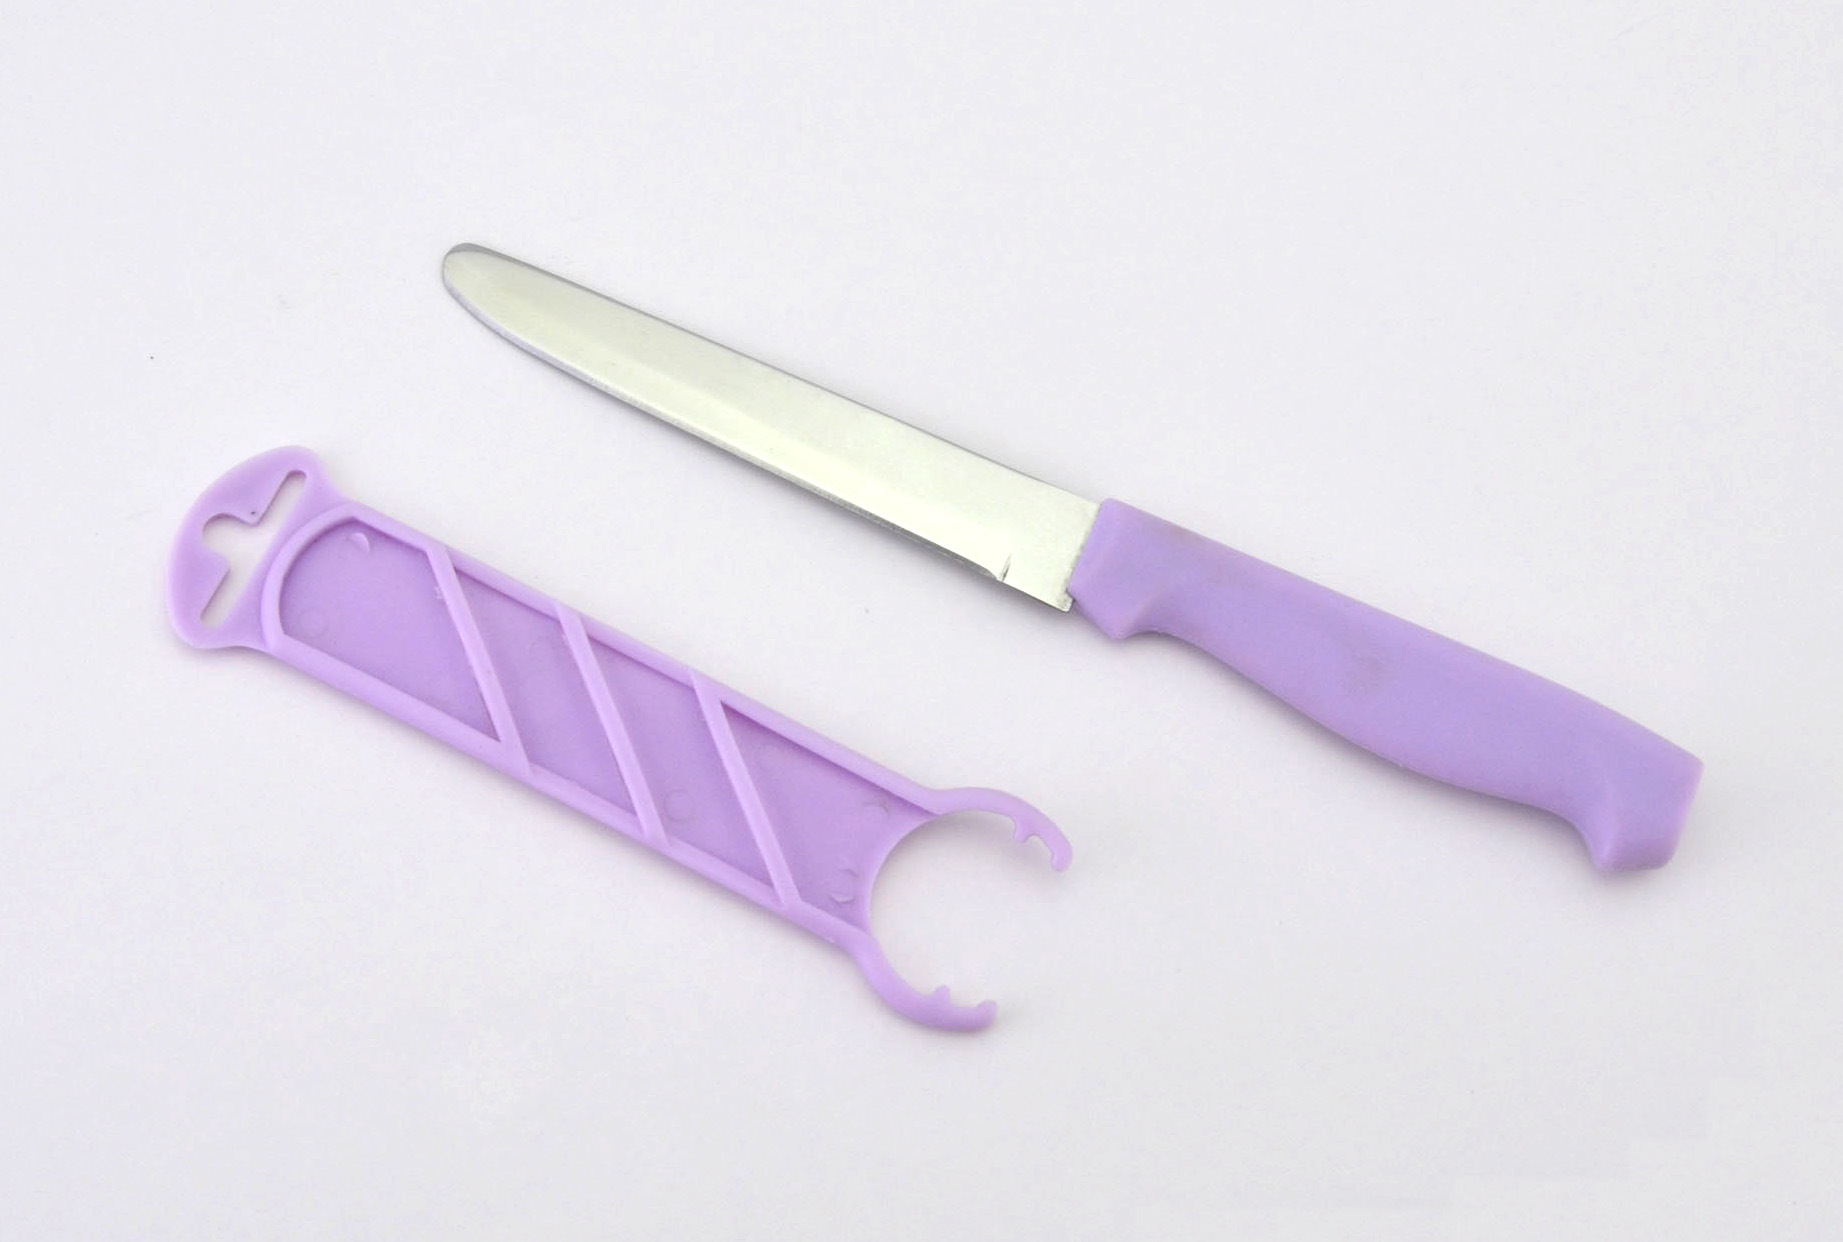 Stainless Steel Utility Fruit Vegetable Knife with Cap